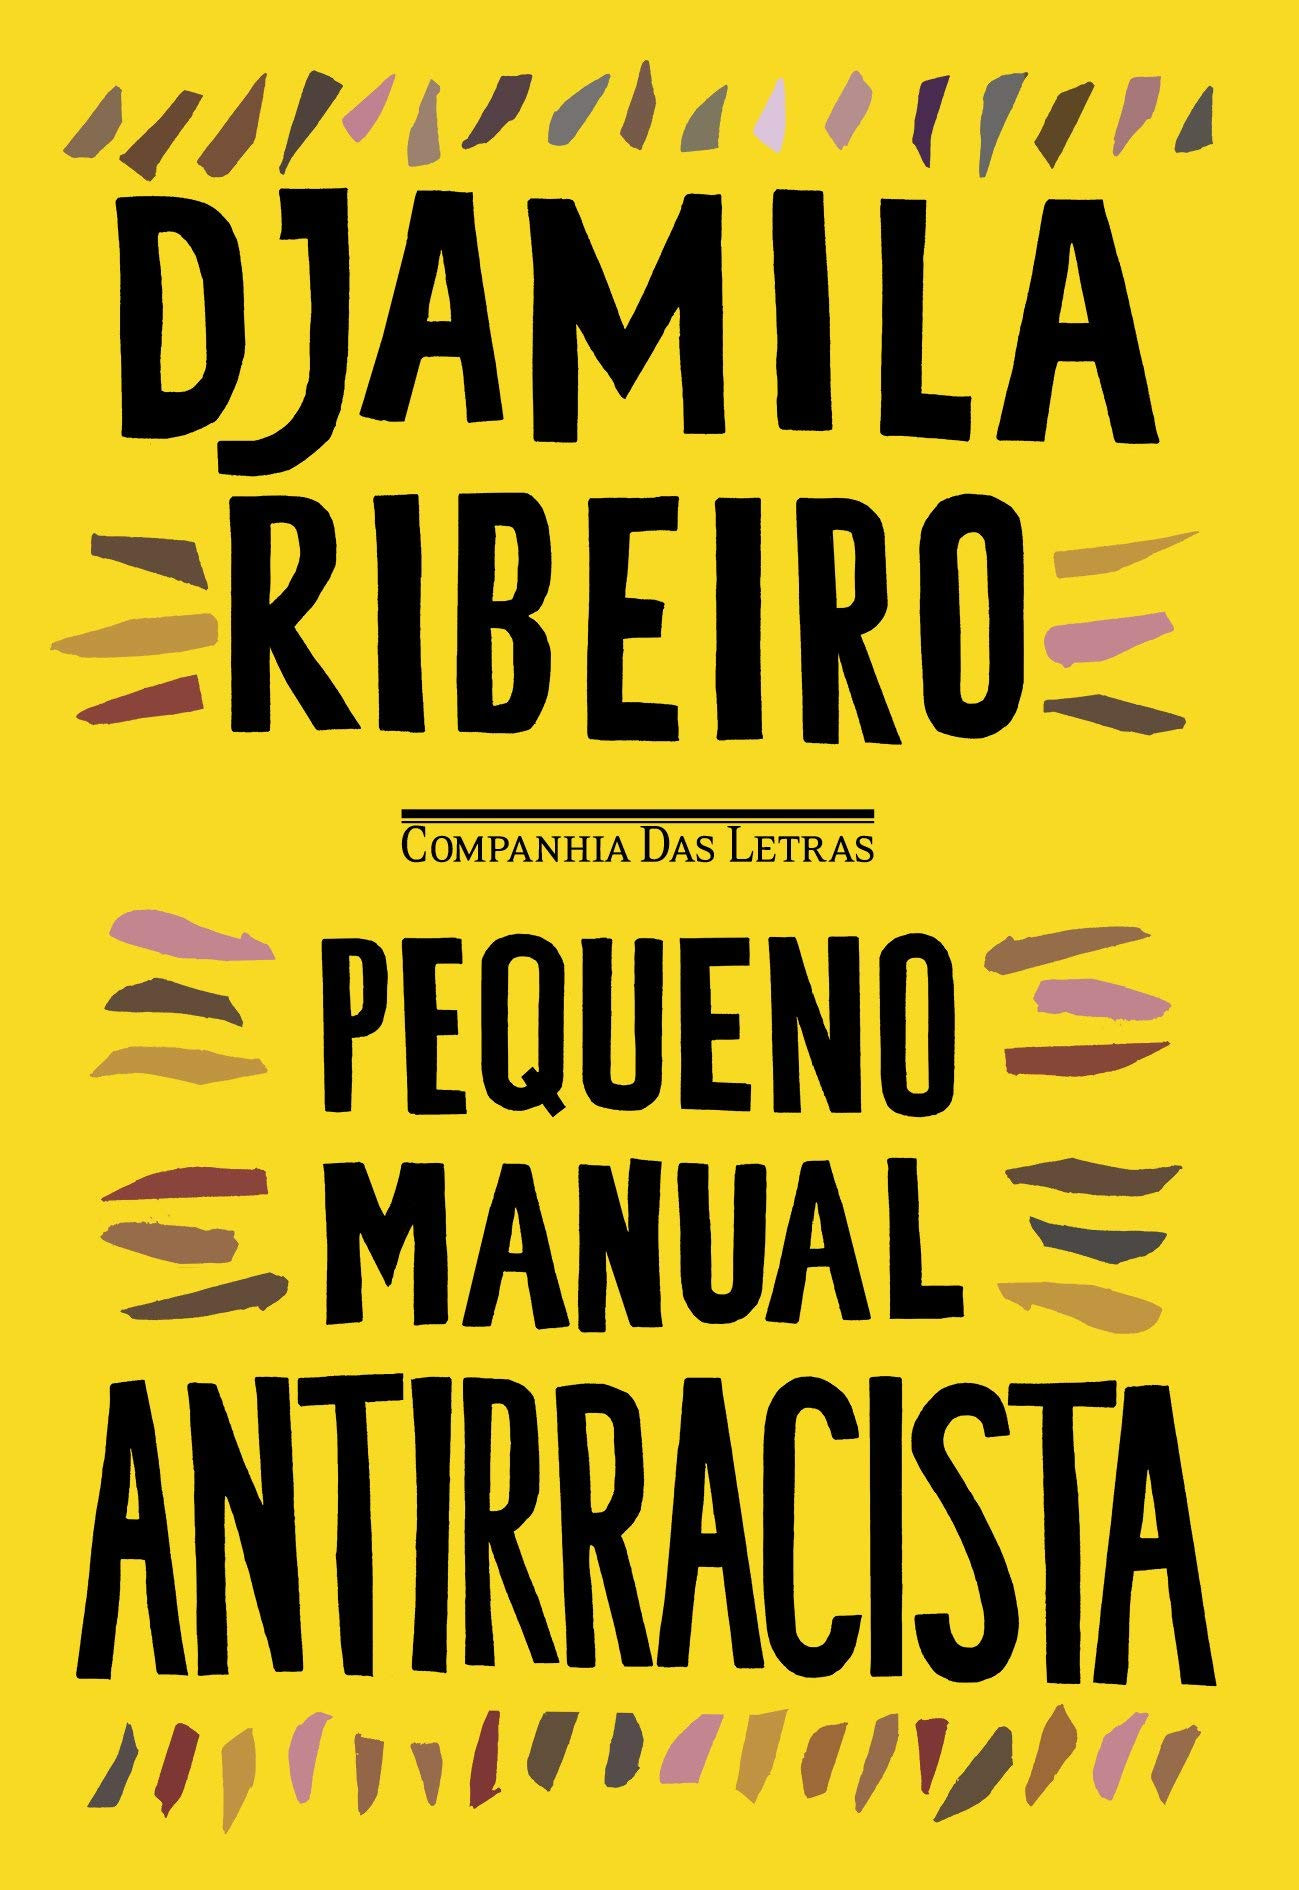 Book cover with yellow background and black writings. “Djamila Ribeiro” and “Small Anti-racist Manual”. In the center, the small logo of Editora Companhia das Letras.